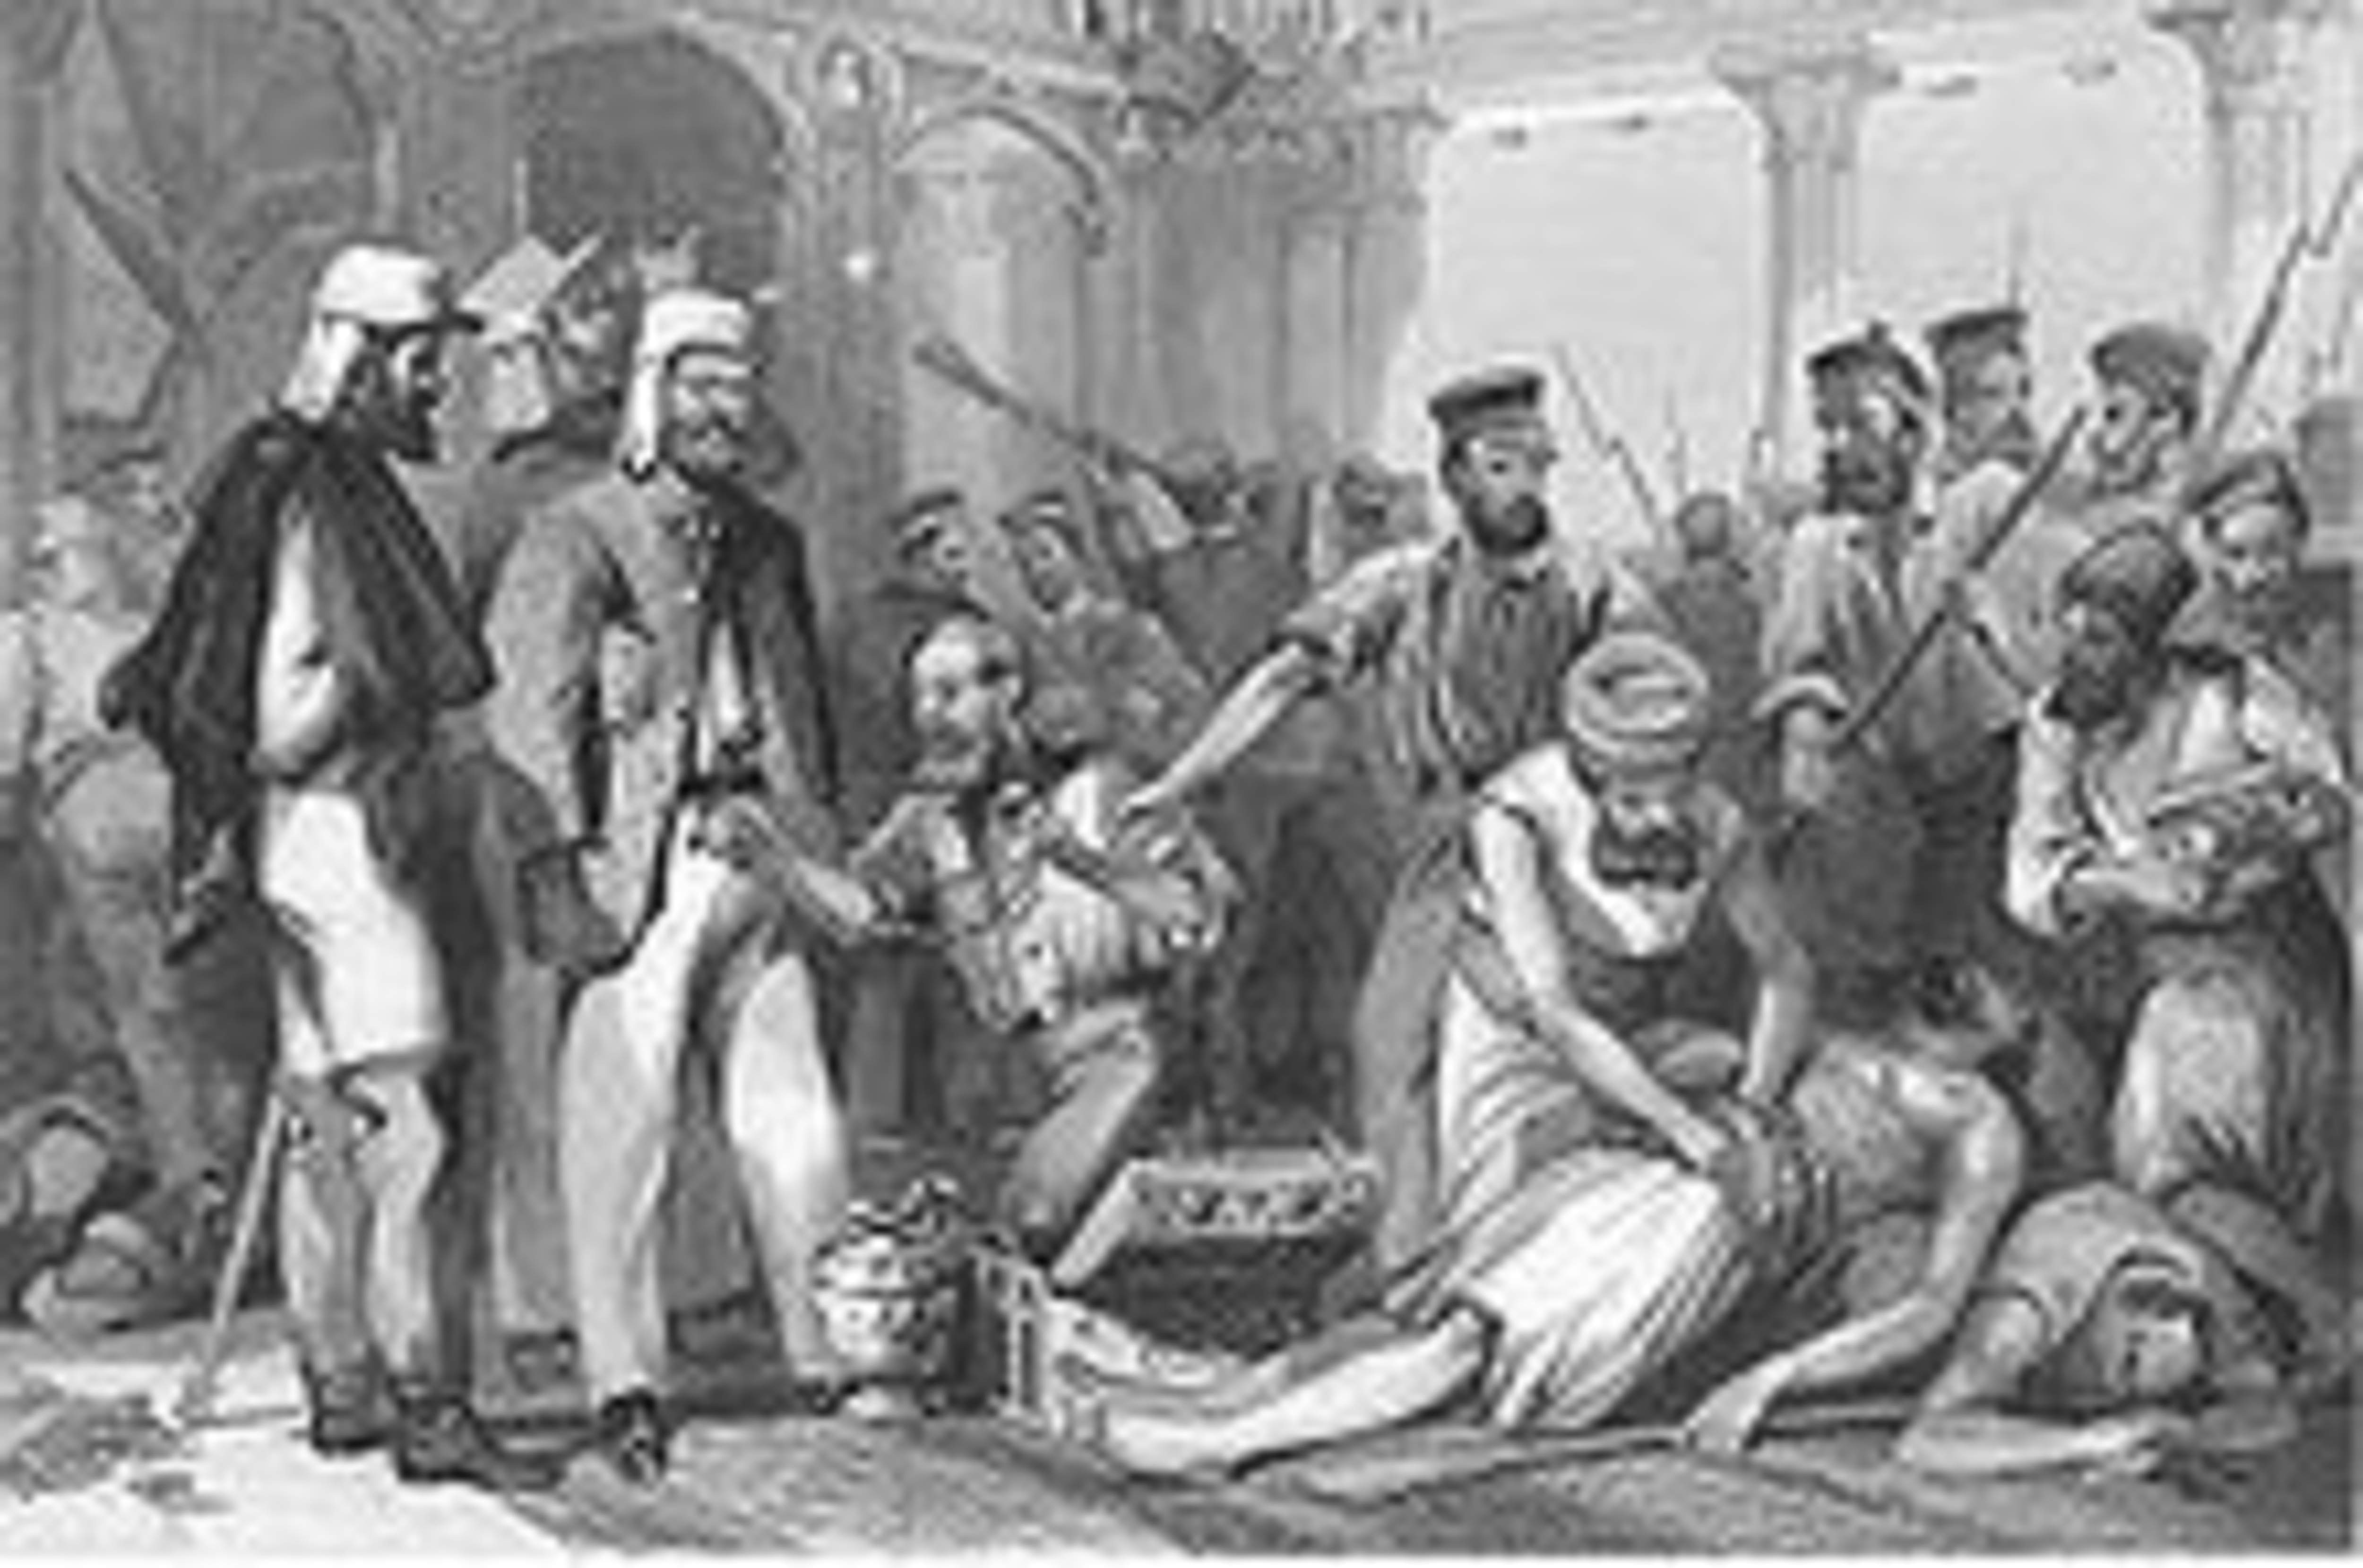 British soldiers looting Kaiser Bagh after its recapture, steel engraving, late 1850s (wikipedia)